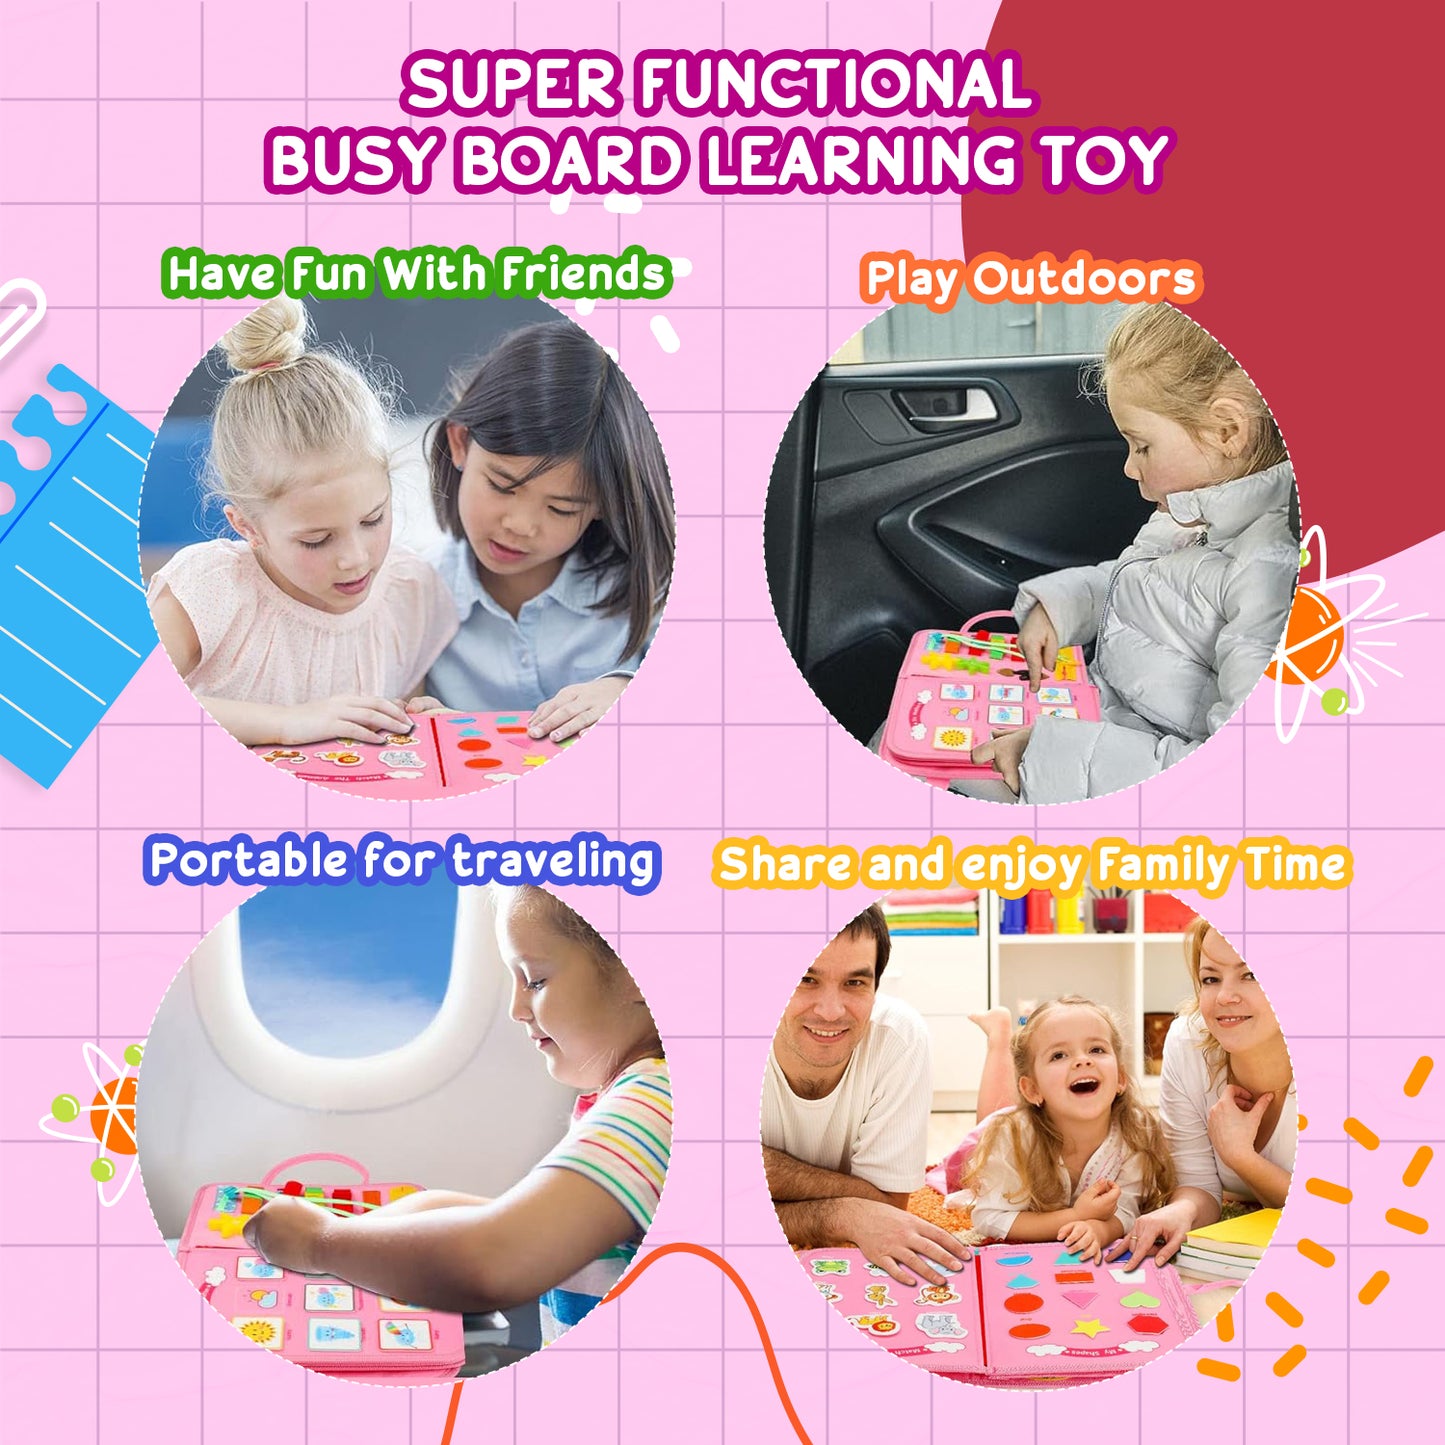 Toddler Montessori Learning Busy Board Sensory Toys 1-6 Year Kids, Pink, 5 Pages